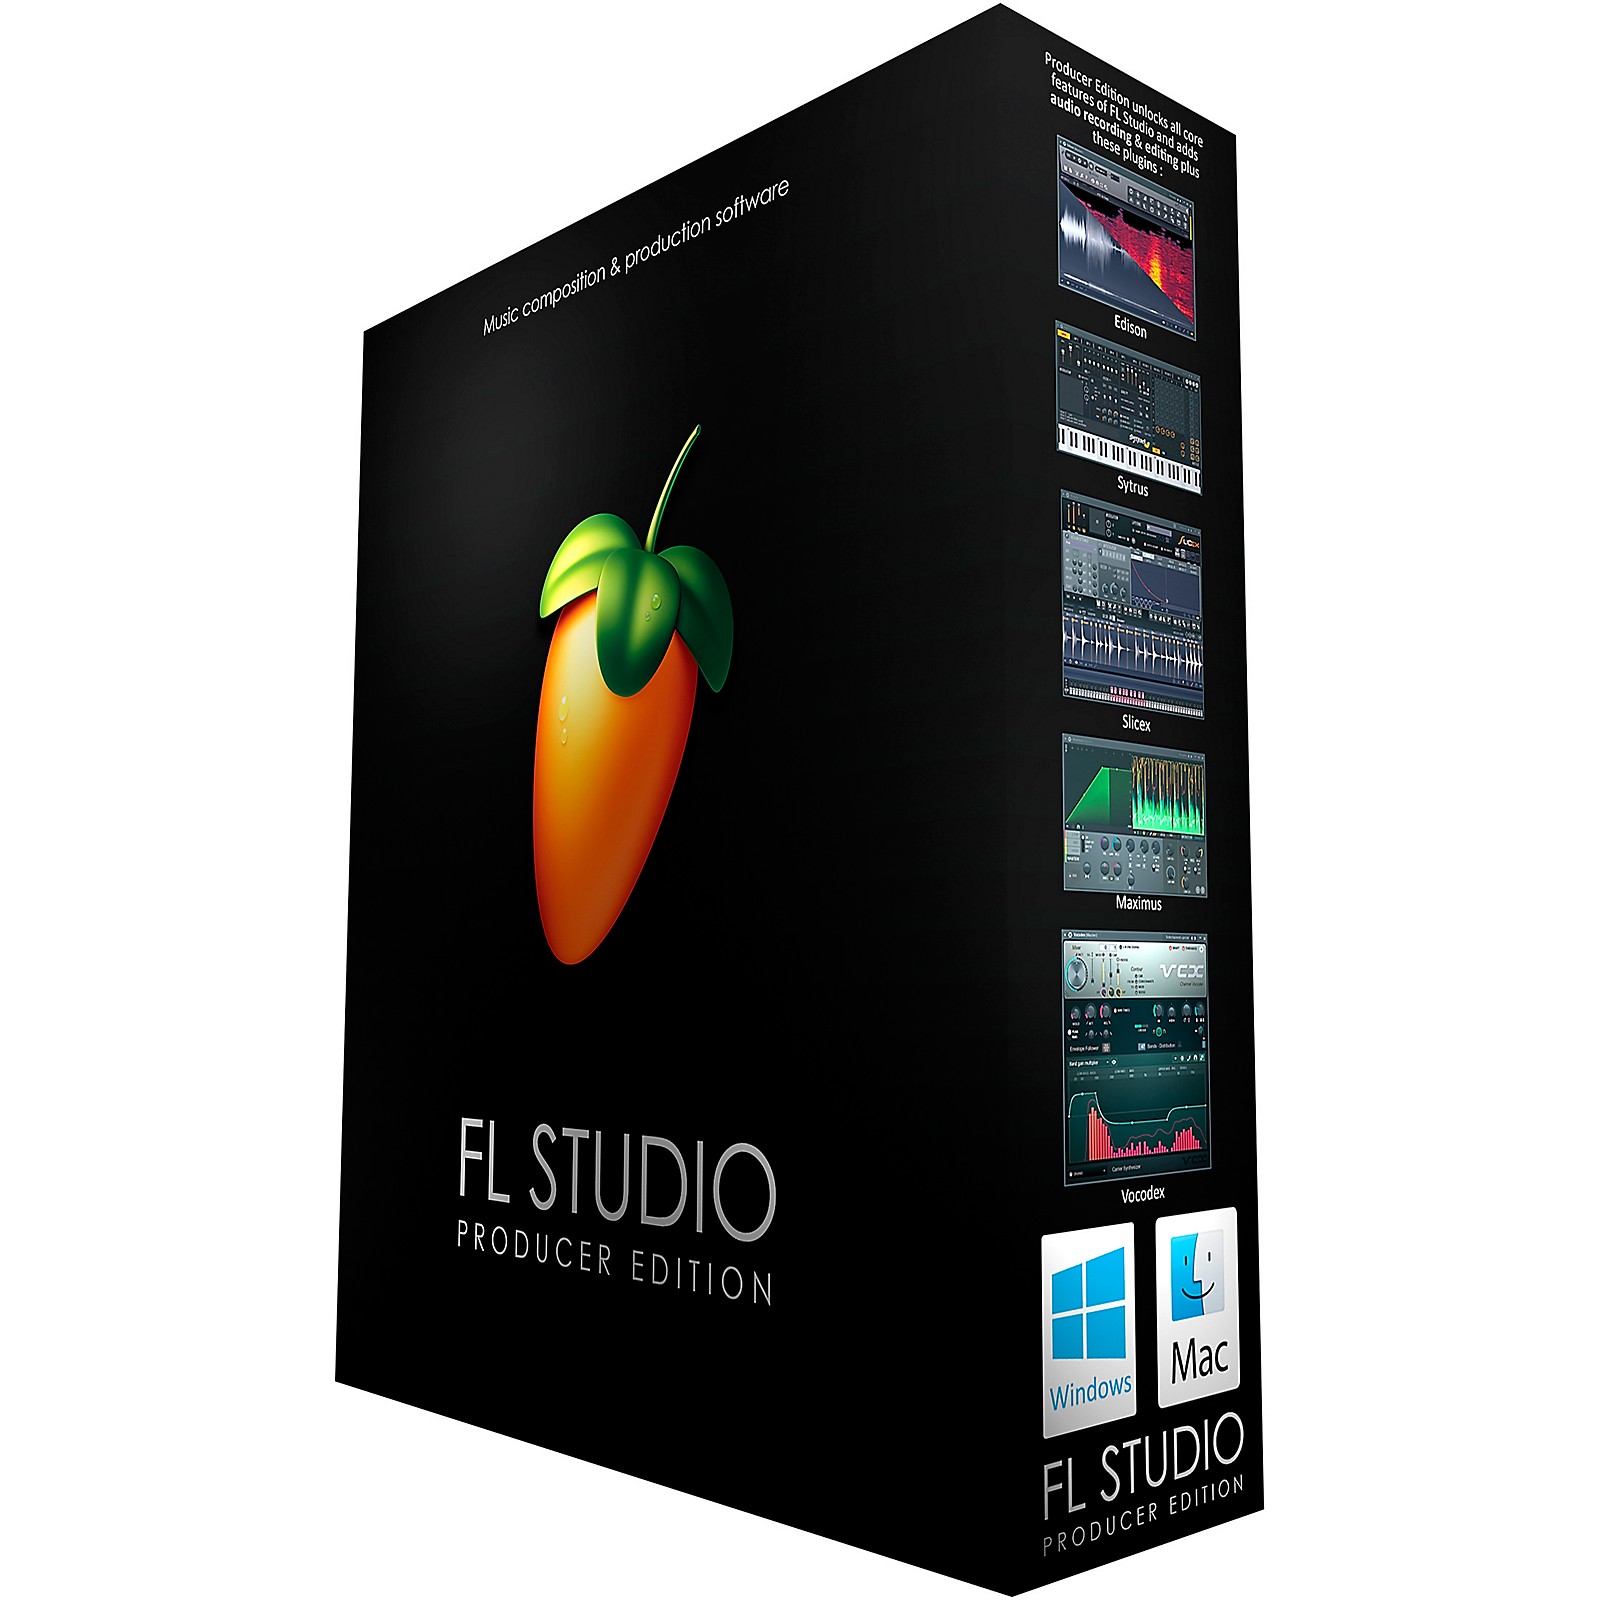 fl studio 12 only records one bar